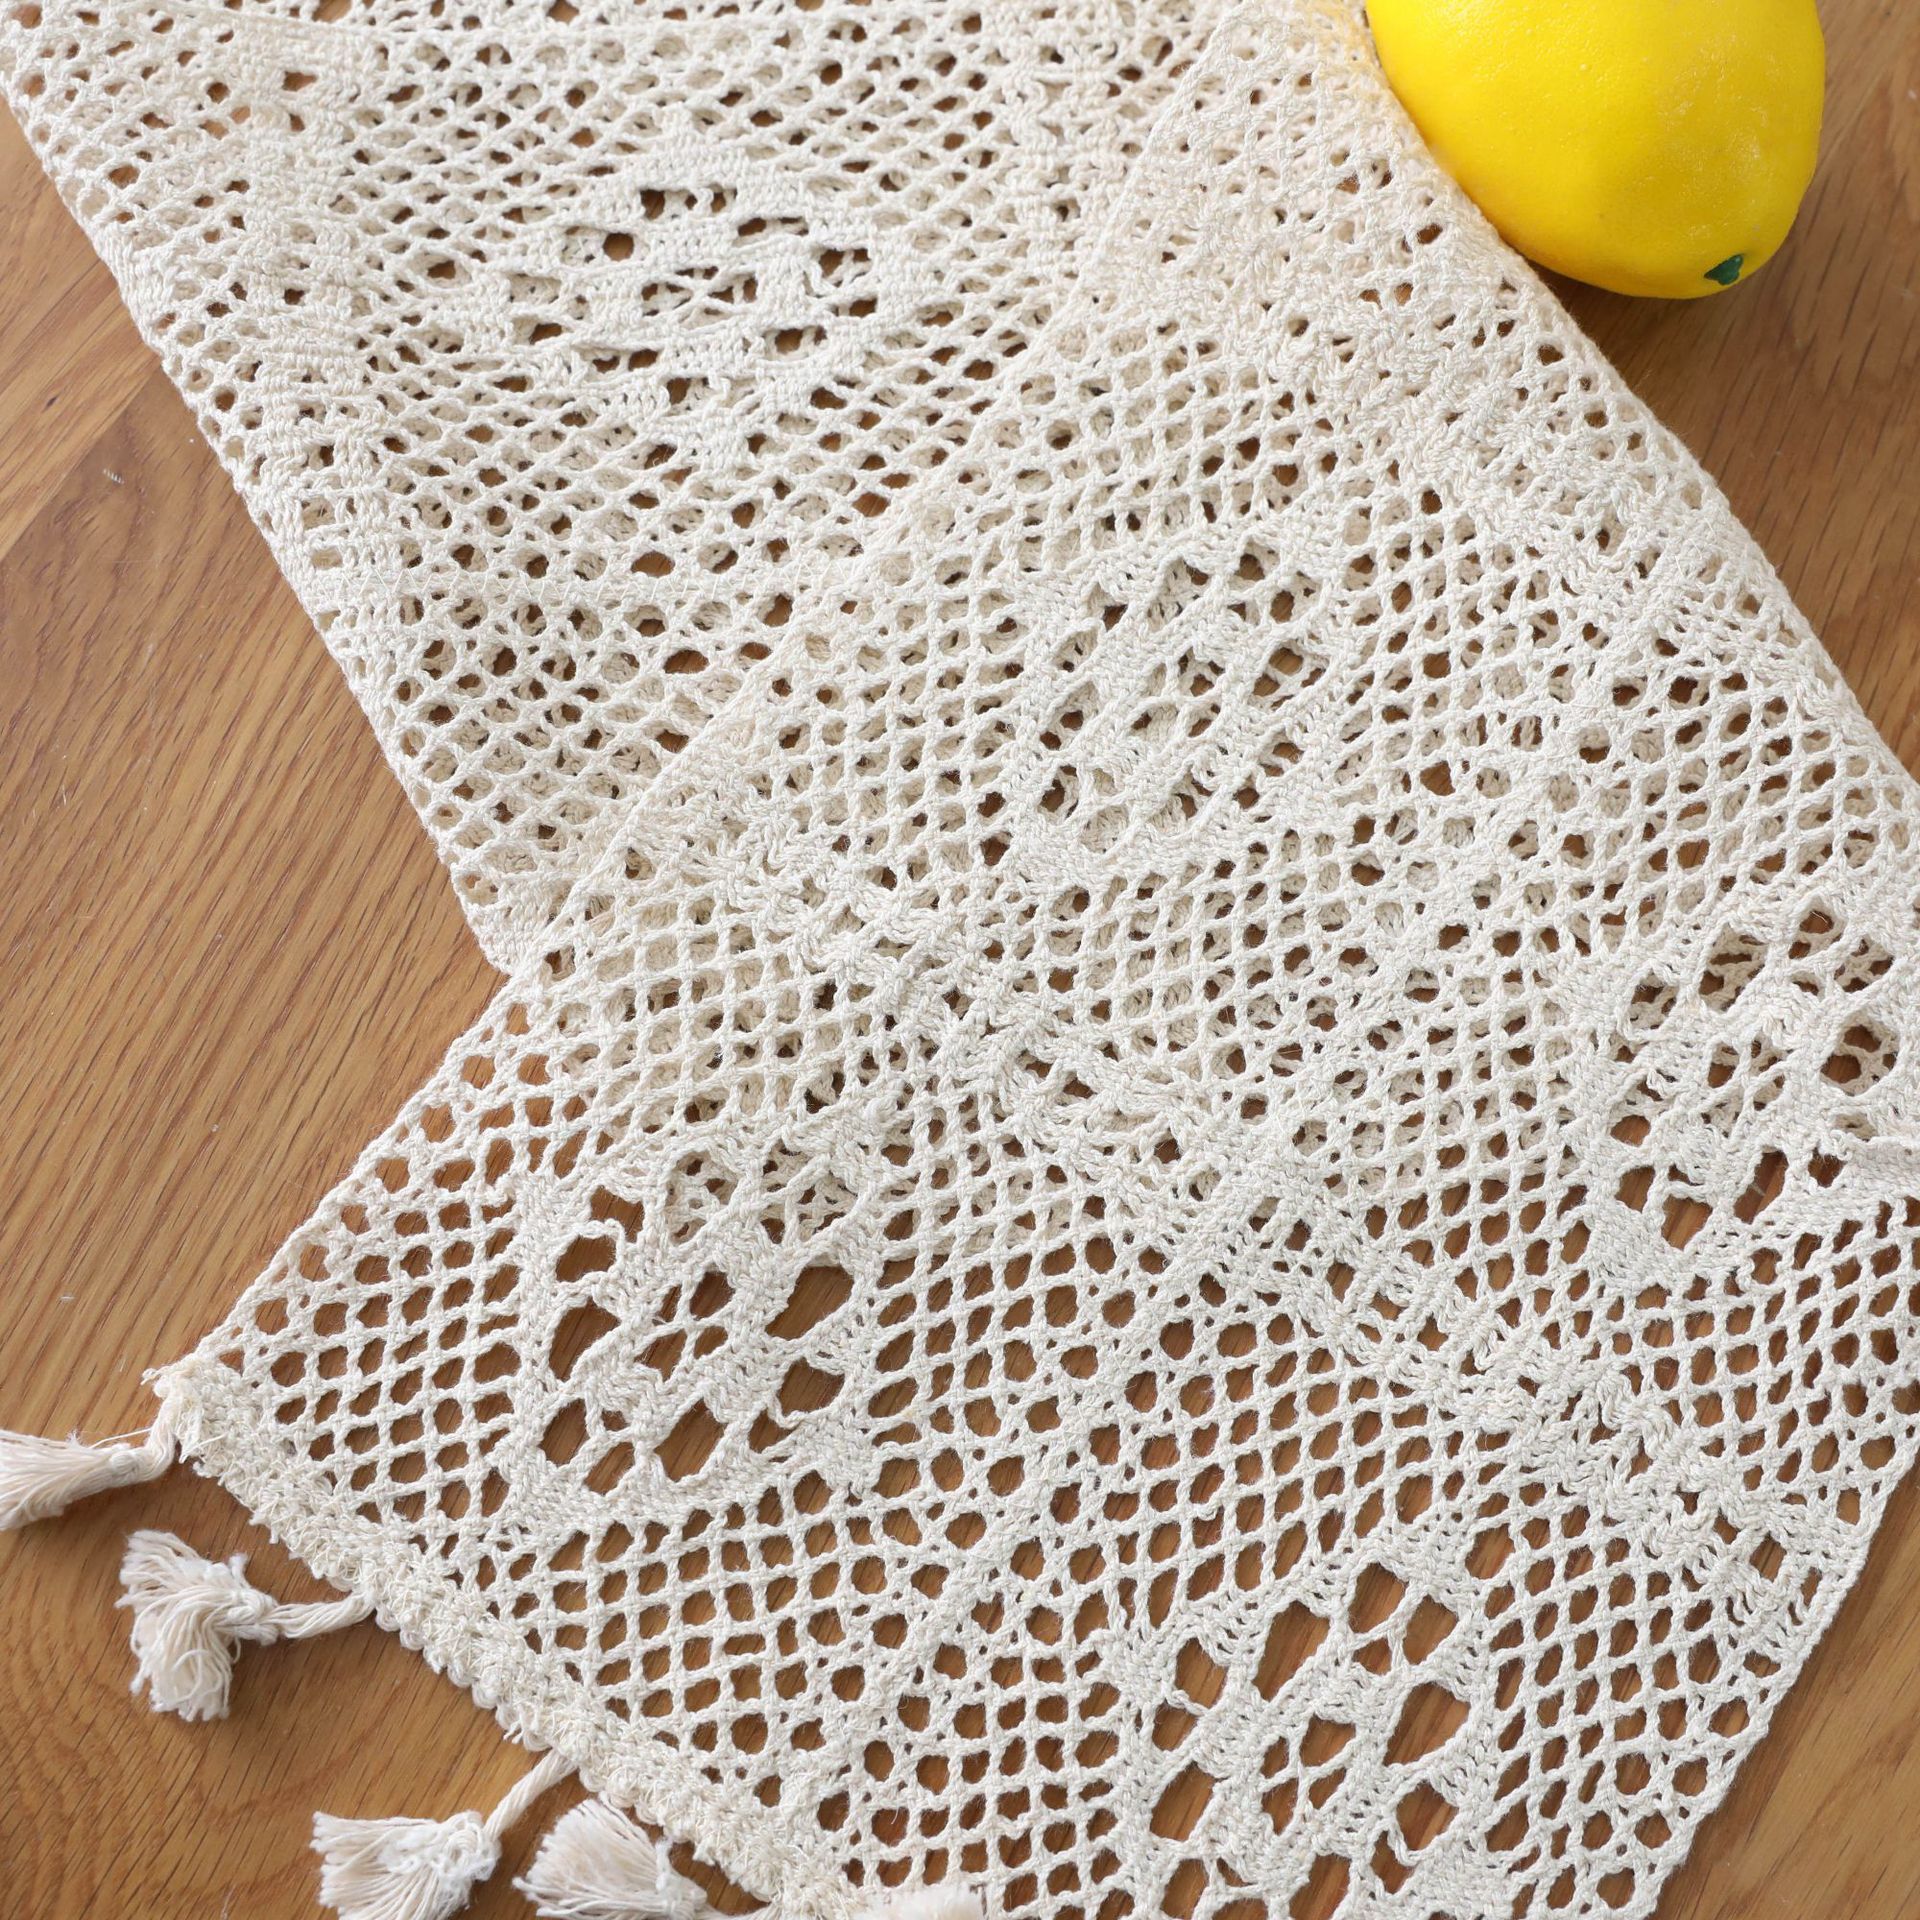 RU072A new Gorgeous new 2021 home table decoration 24cm*200cm ivory Macrame lace table runner